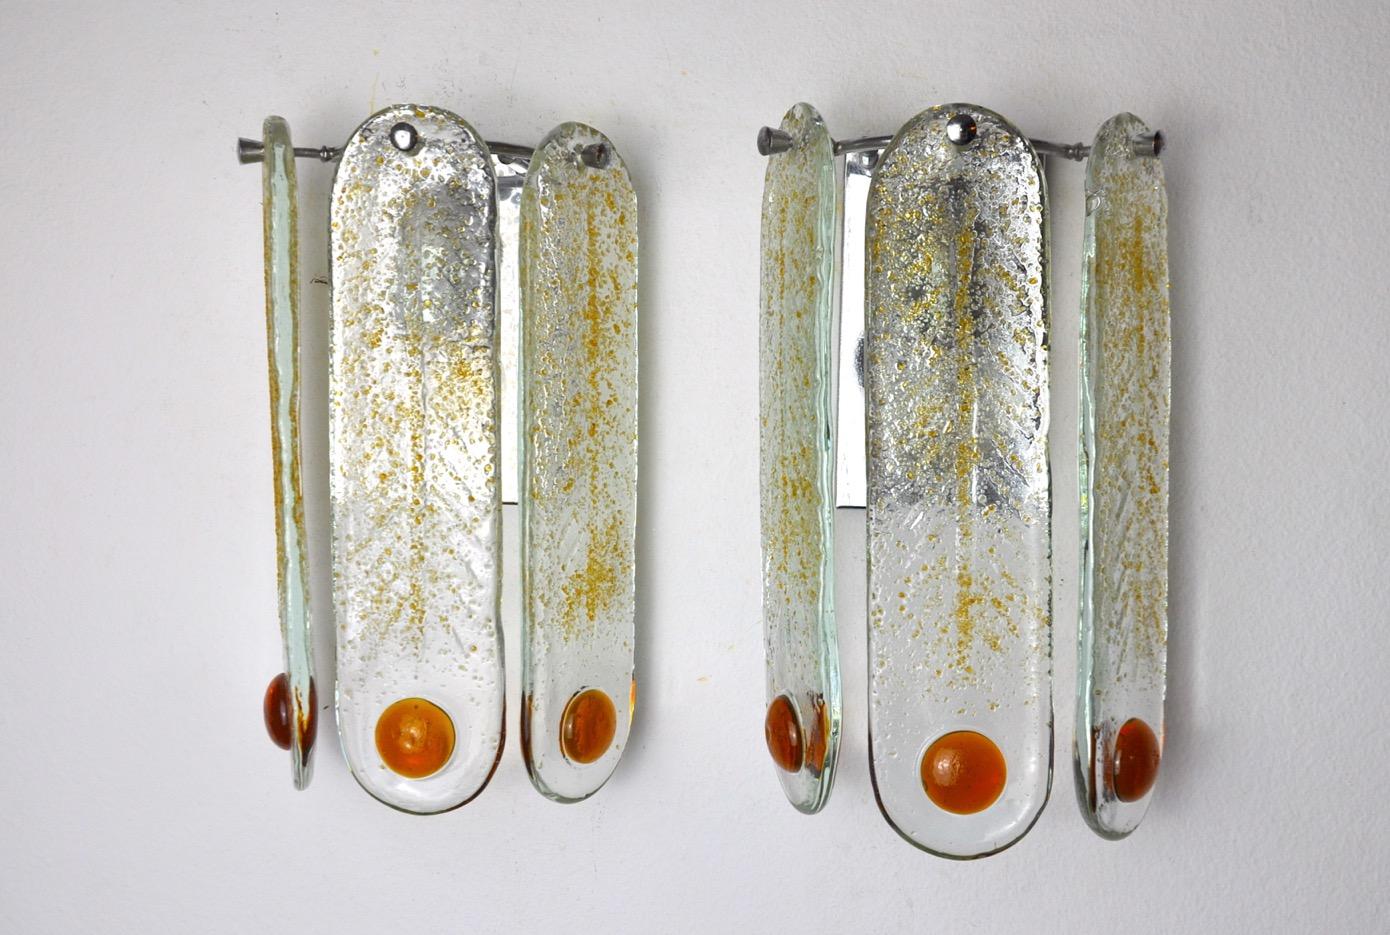 Very nice pair of mazzega sconces designed and produced in murano, italy in the 60s. This magnificent pair of sconces is made of orange frosted murano glass, suspended from a silver metal structure. Rare design object that will illuminate your